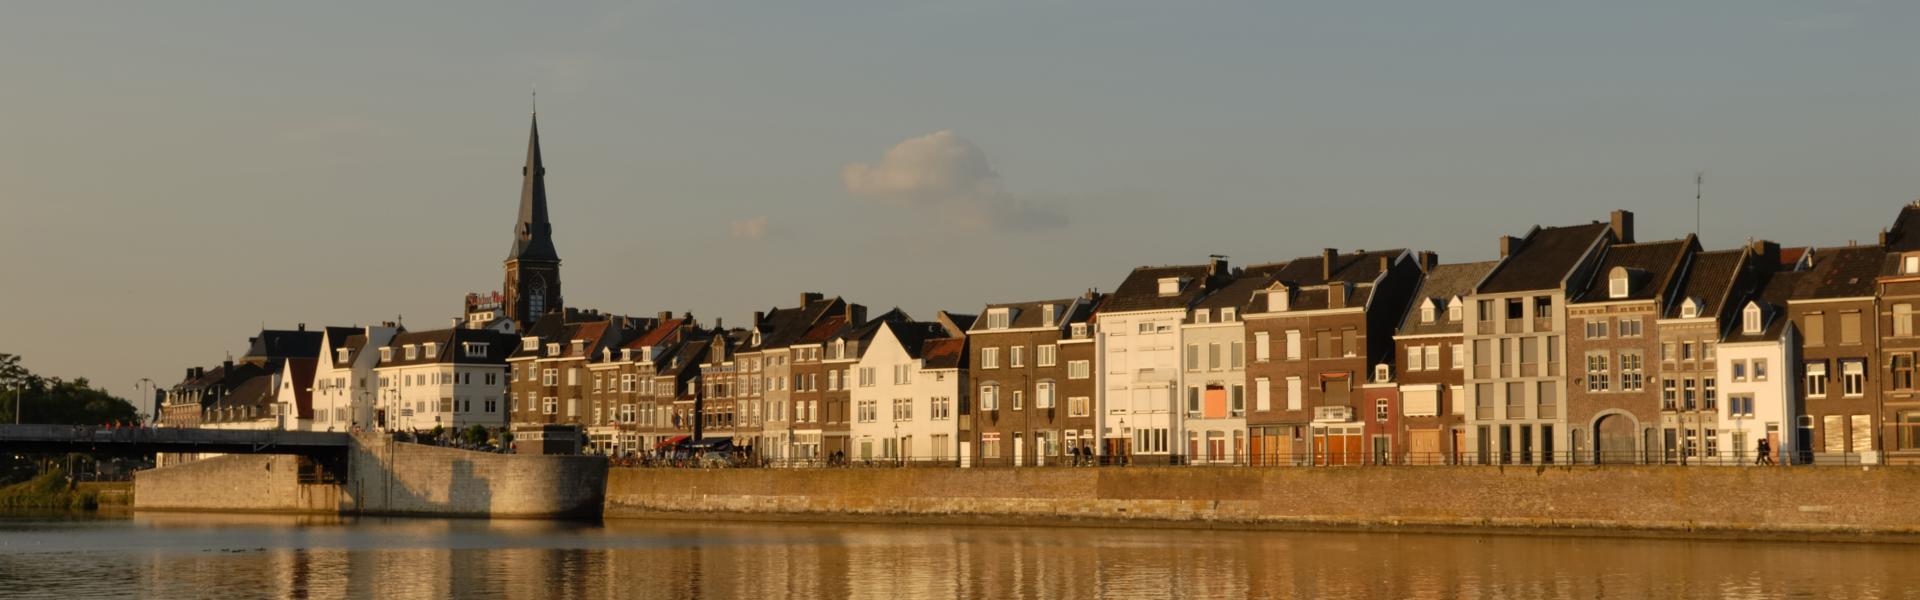 View on the river Maas in Maastricht, a city in The Netherlands